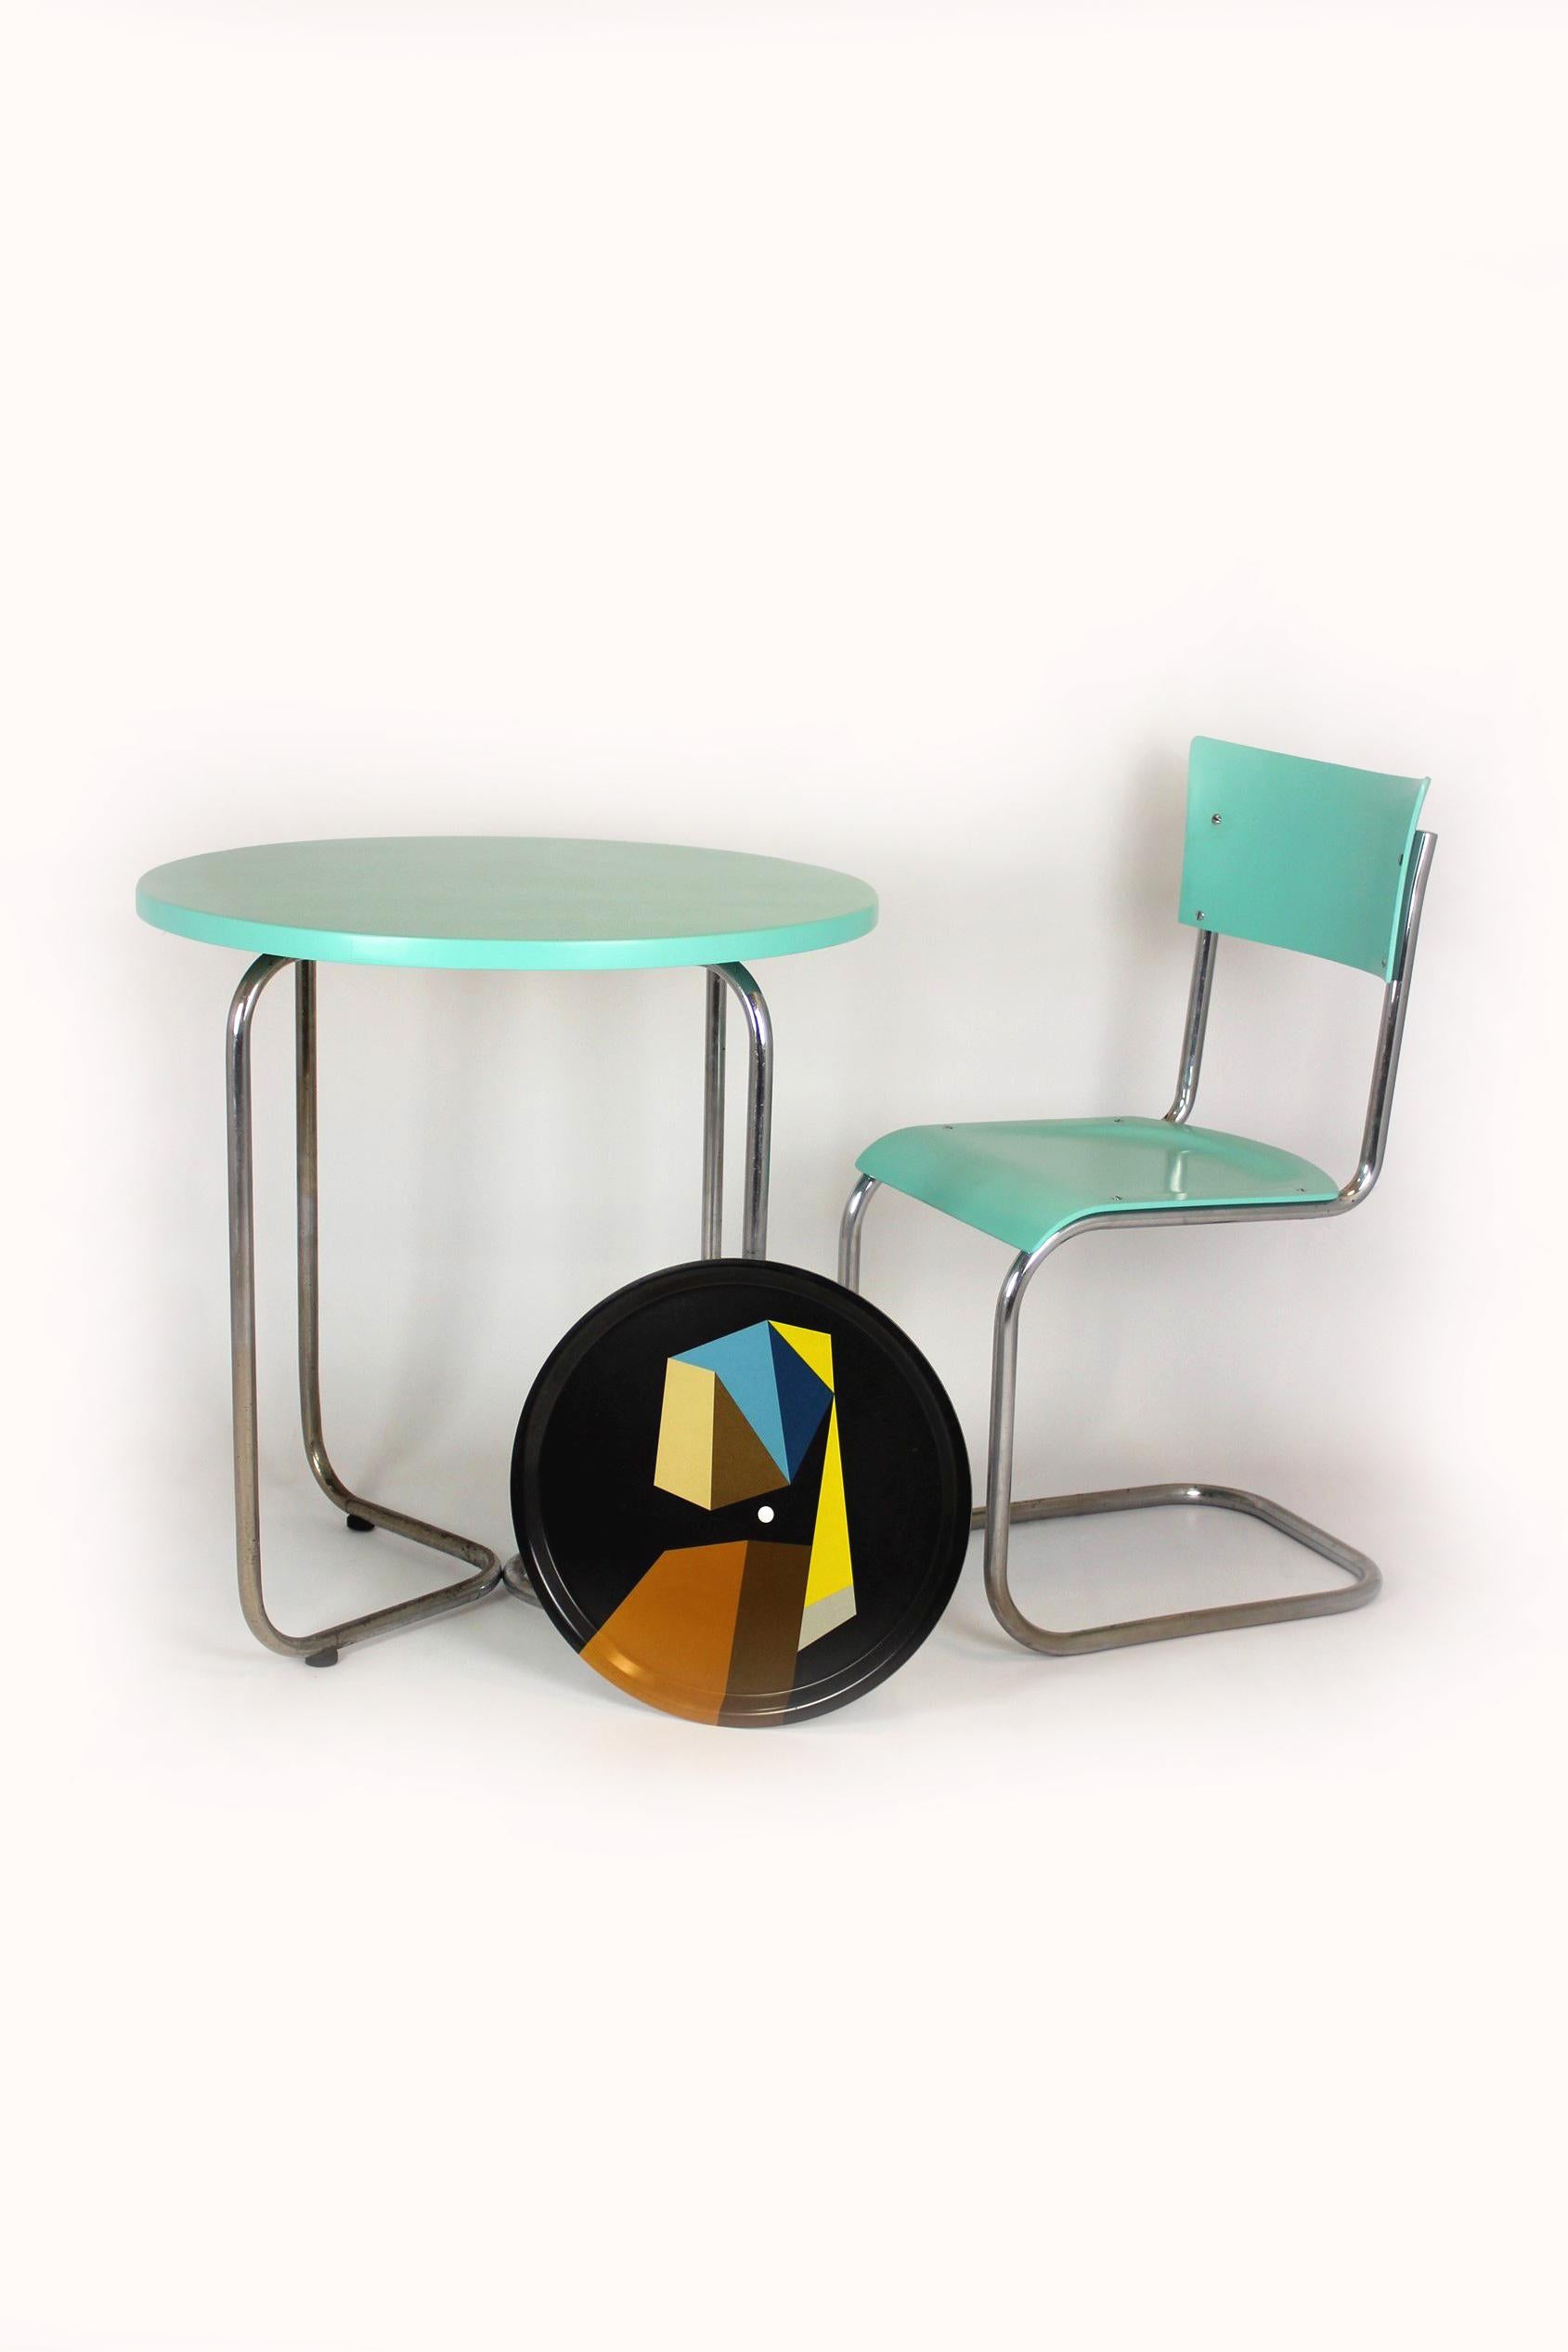 Bauhaus Tubular Steel Set, Round Table and Chair by Mart Stam, 1930s For Sale 14